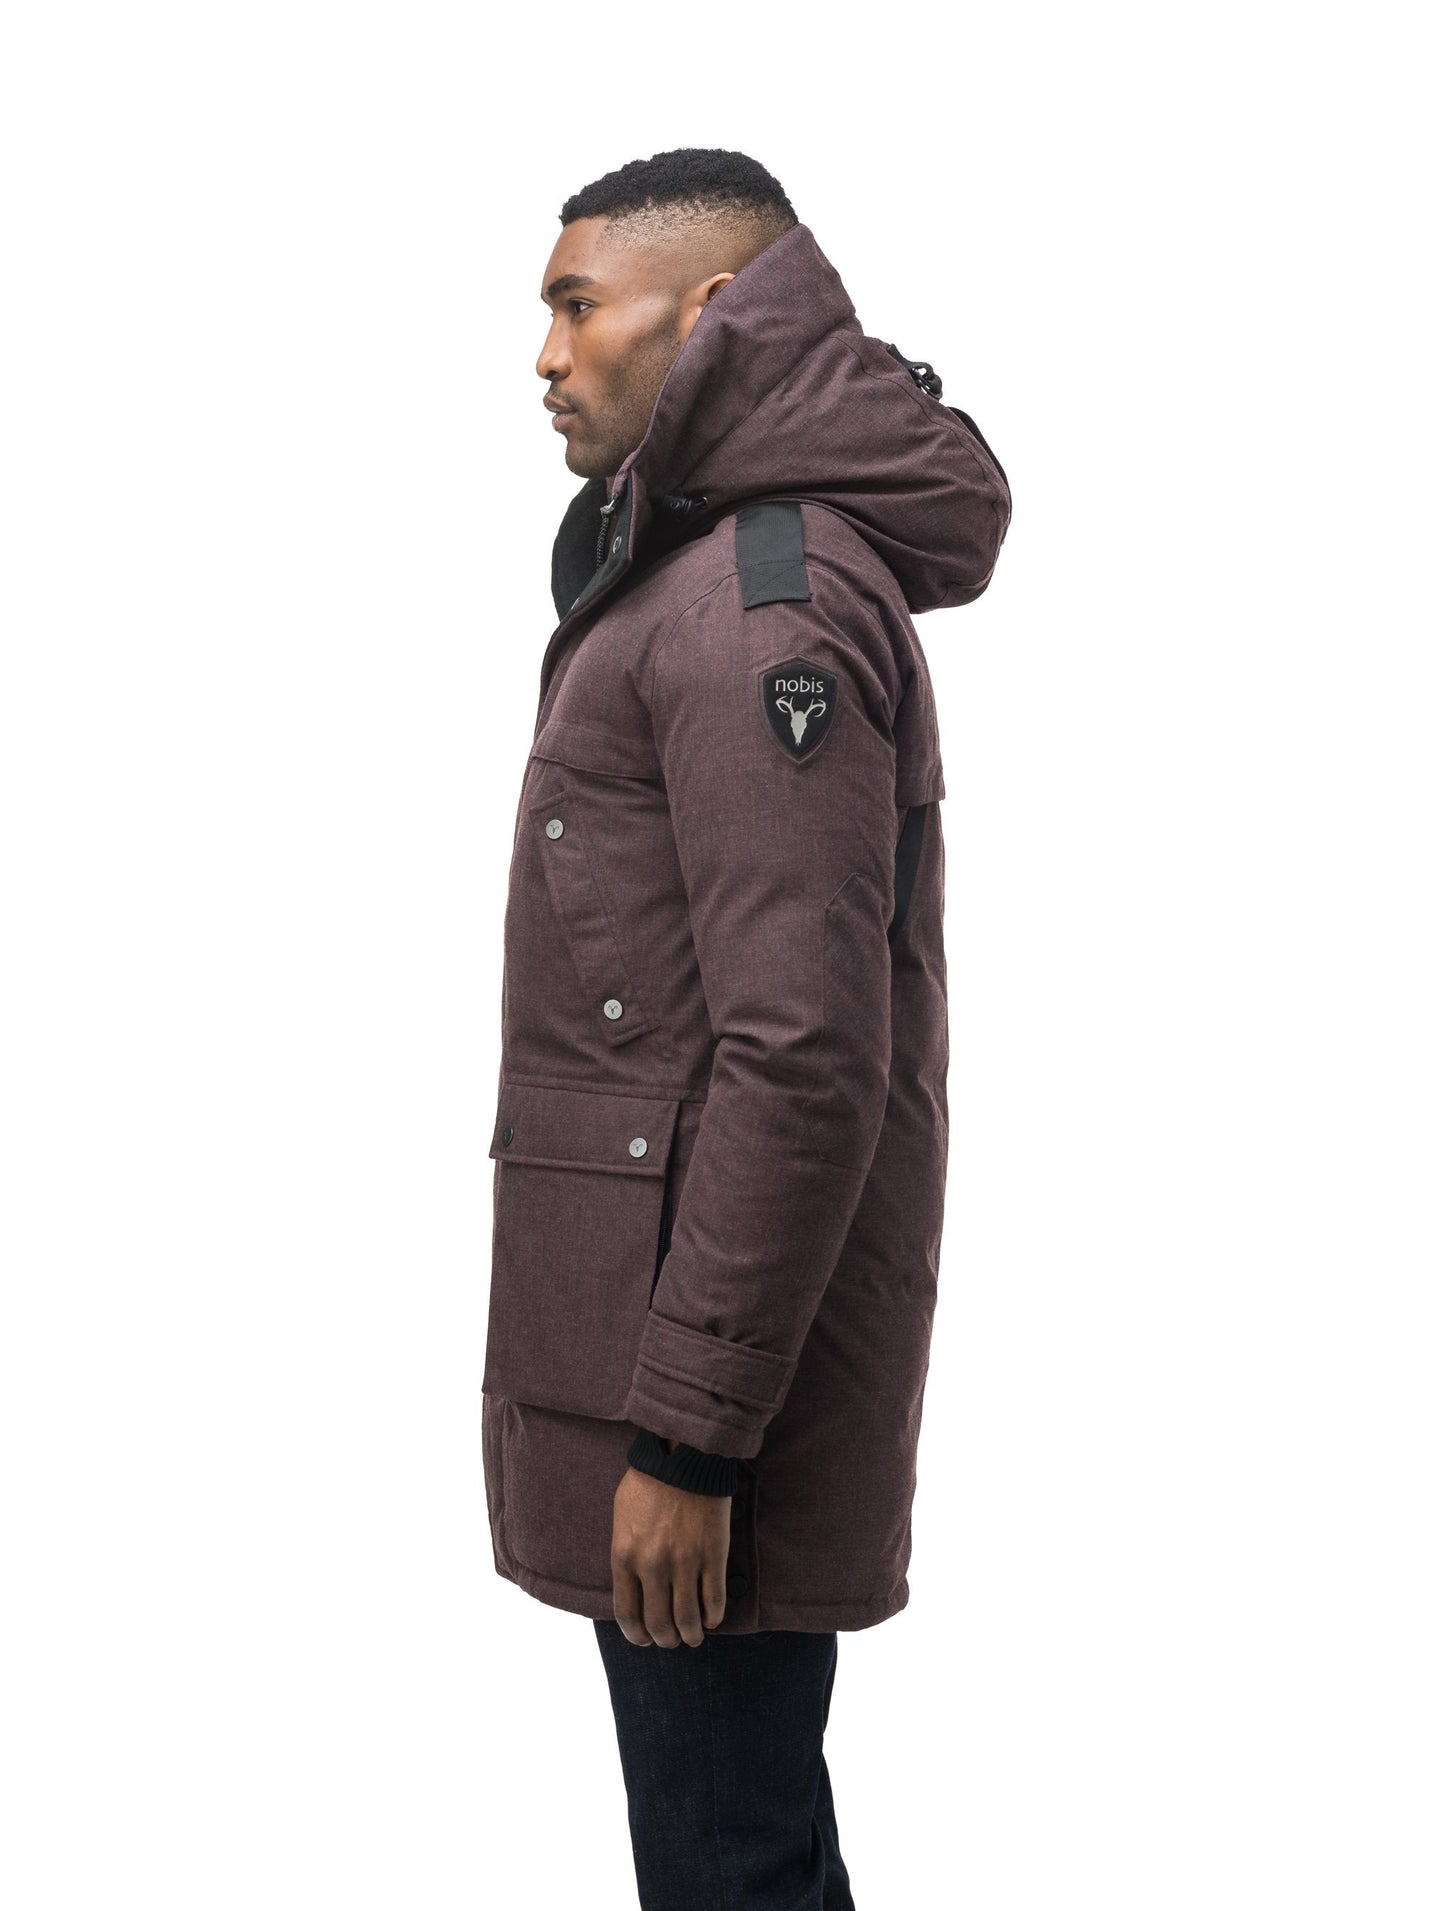 Men's Best Selling Parka the Yatesy is a down filled jacket with a zipper closure and magnetic placket in H. Burgundy